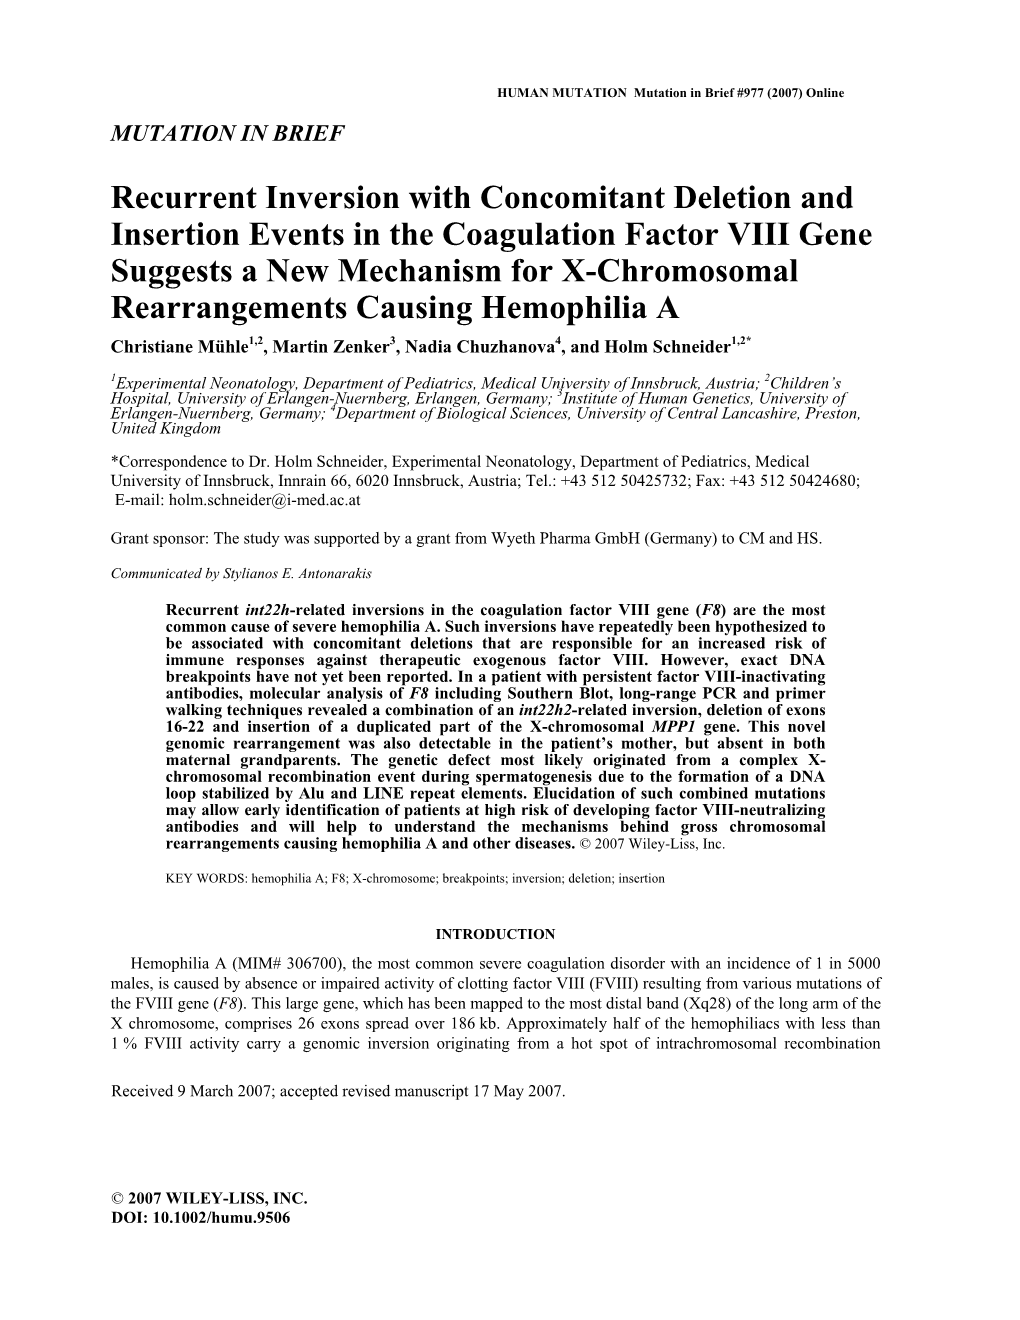 Recurrent Inversion with Concomitant Deletion and Insertion Events in The